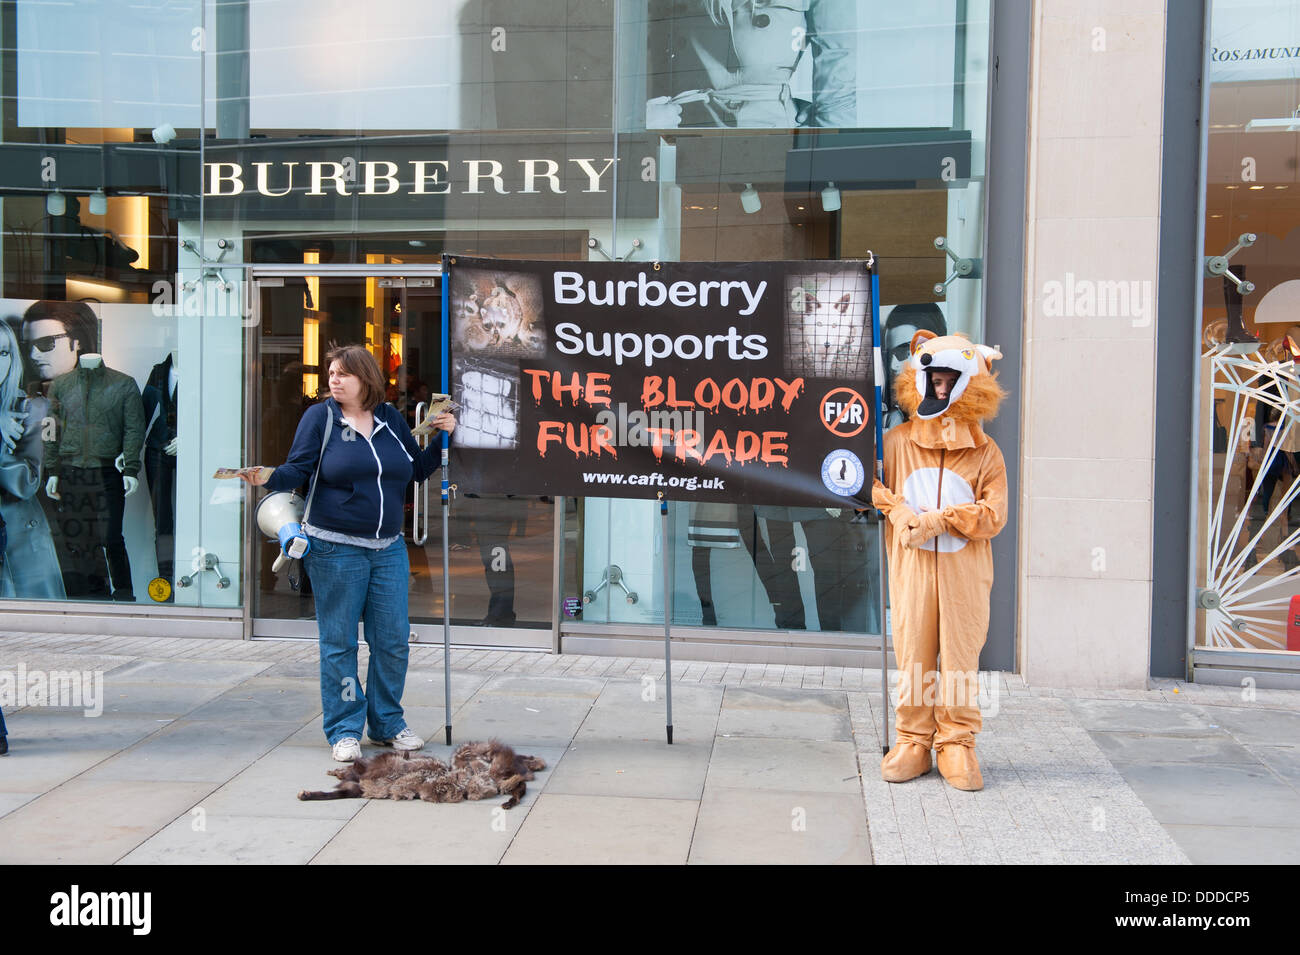 coalition to abolish fur trade members protest outside burberry shop in central manchester, uk 31 August 2013 Stock Photo